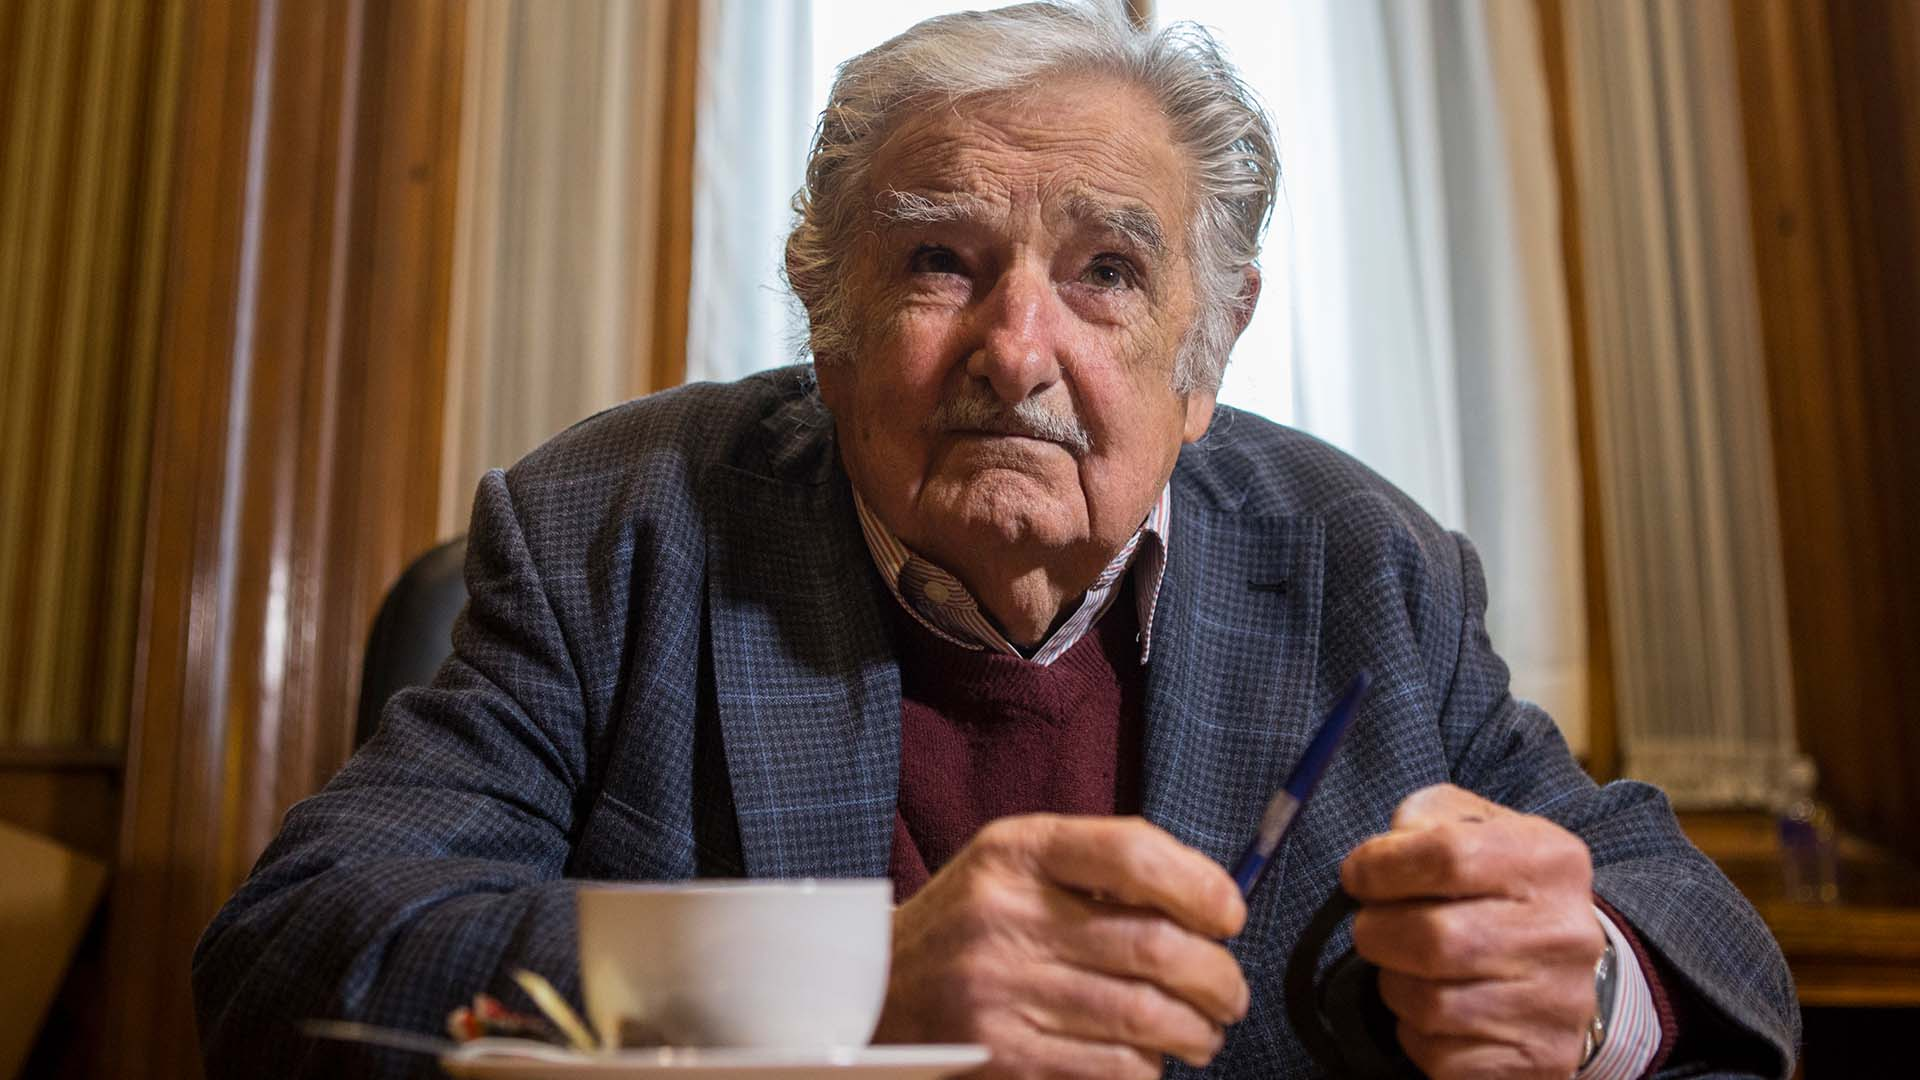 Jose Mujica: The world according to the humblest of leaders